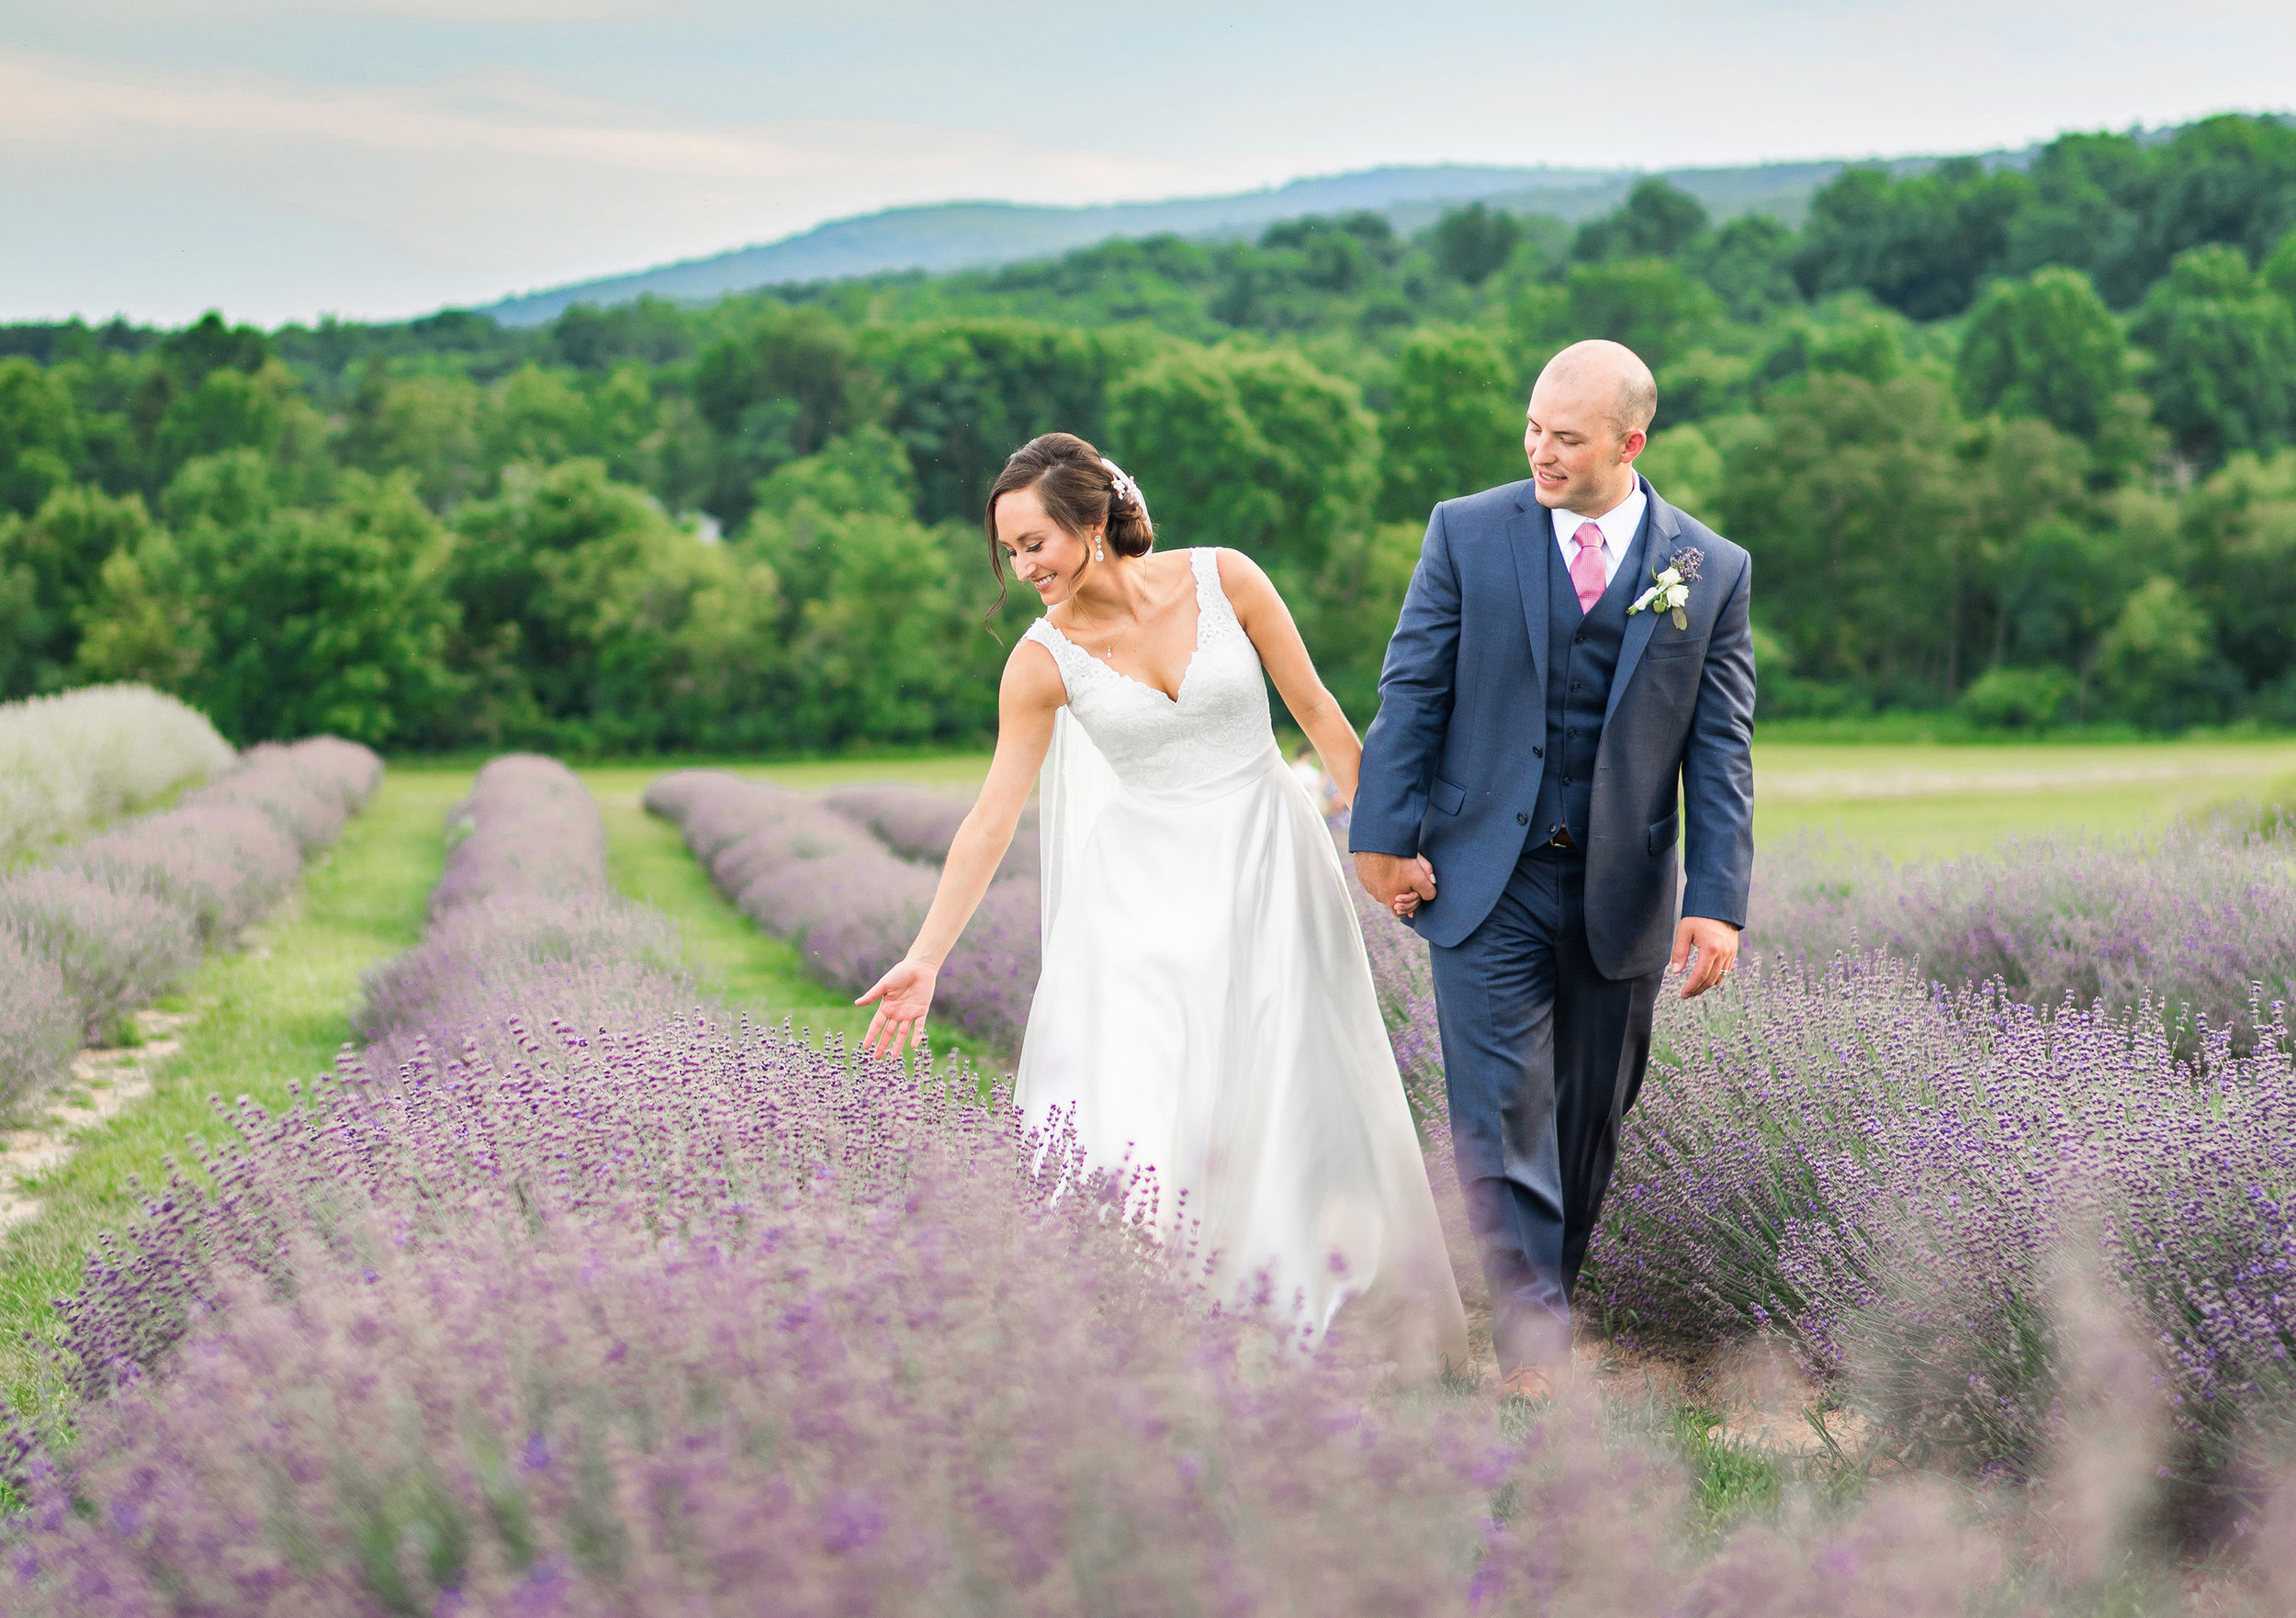 Springfield Manor Winery Distillery lavender fields with bride and groom